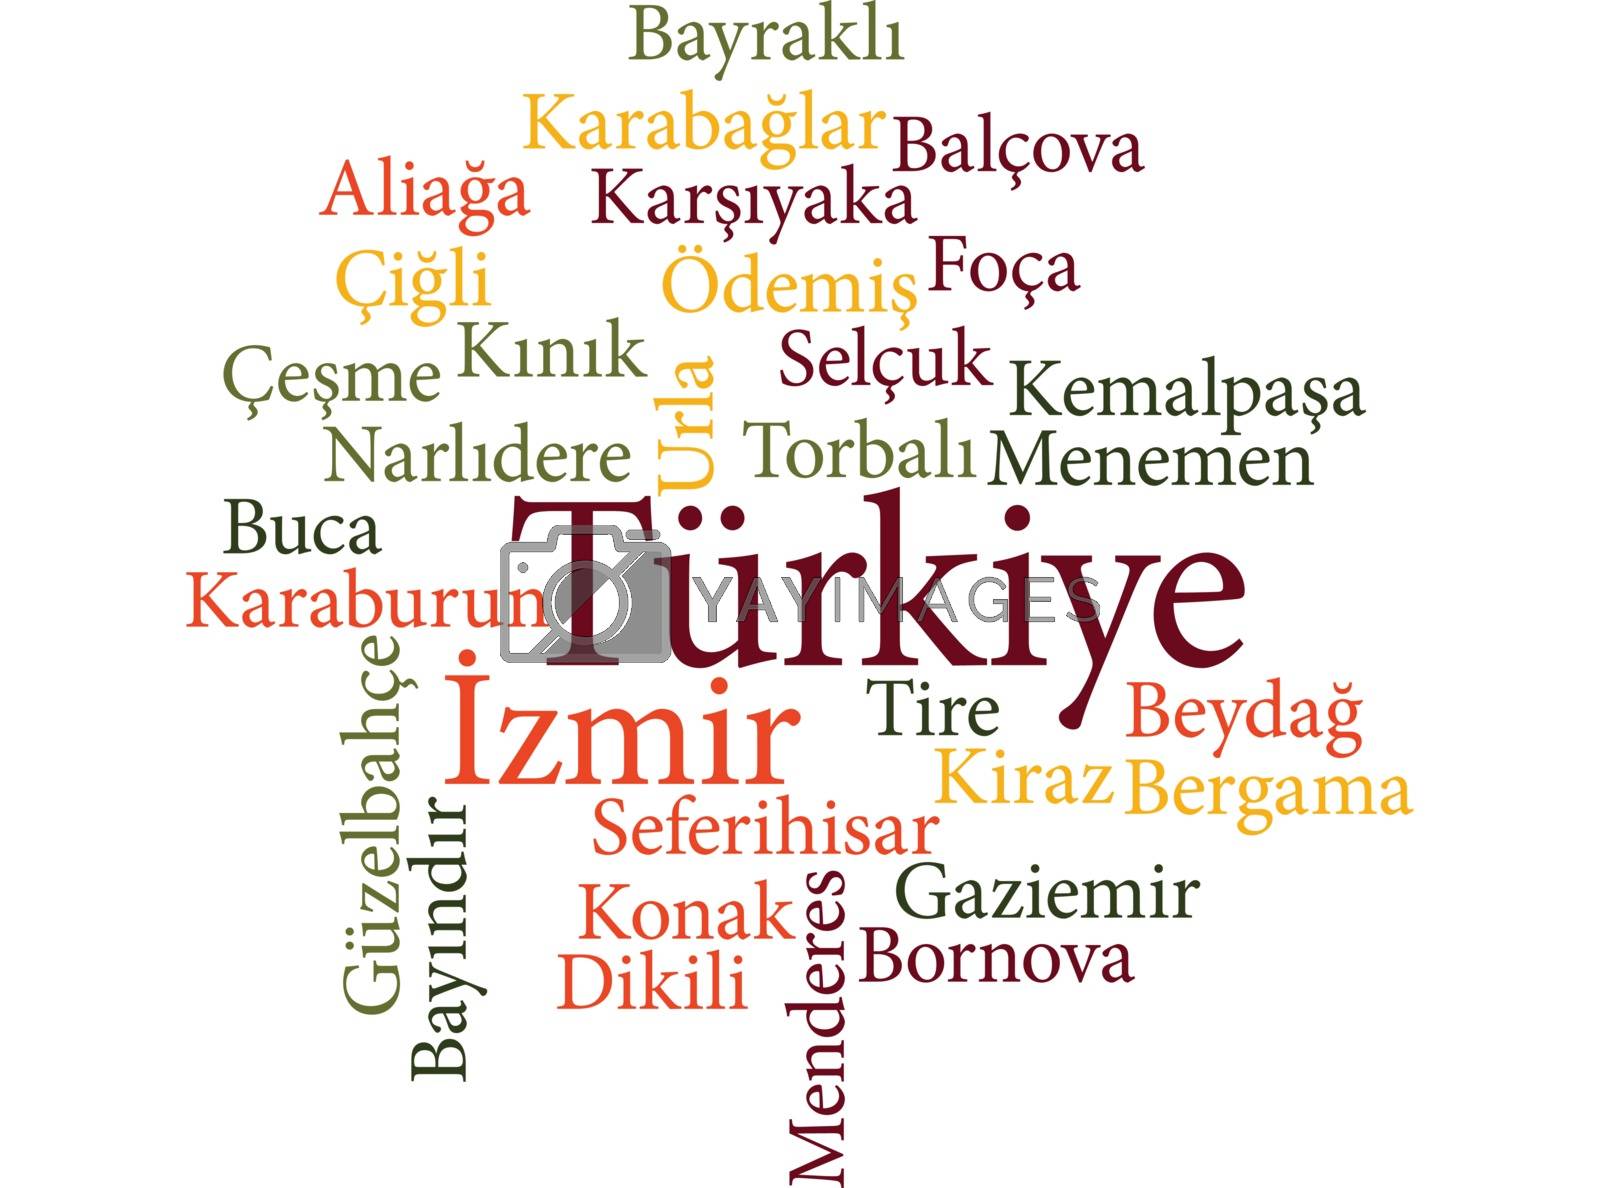 Royalty free image of Turkish city Izmir subdivisions in word clouds by Istanbul2009